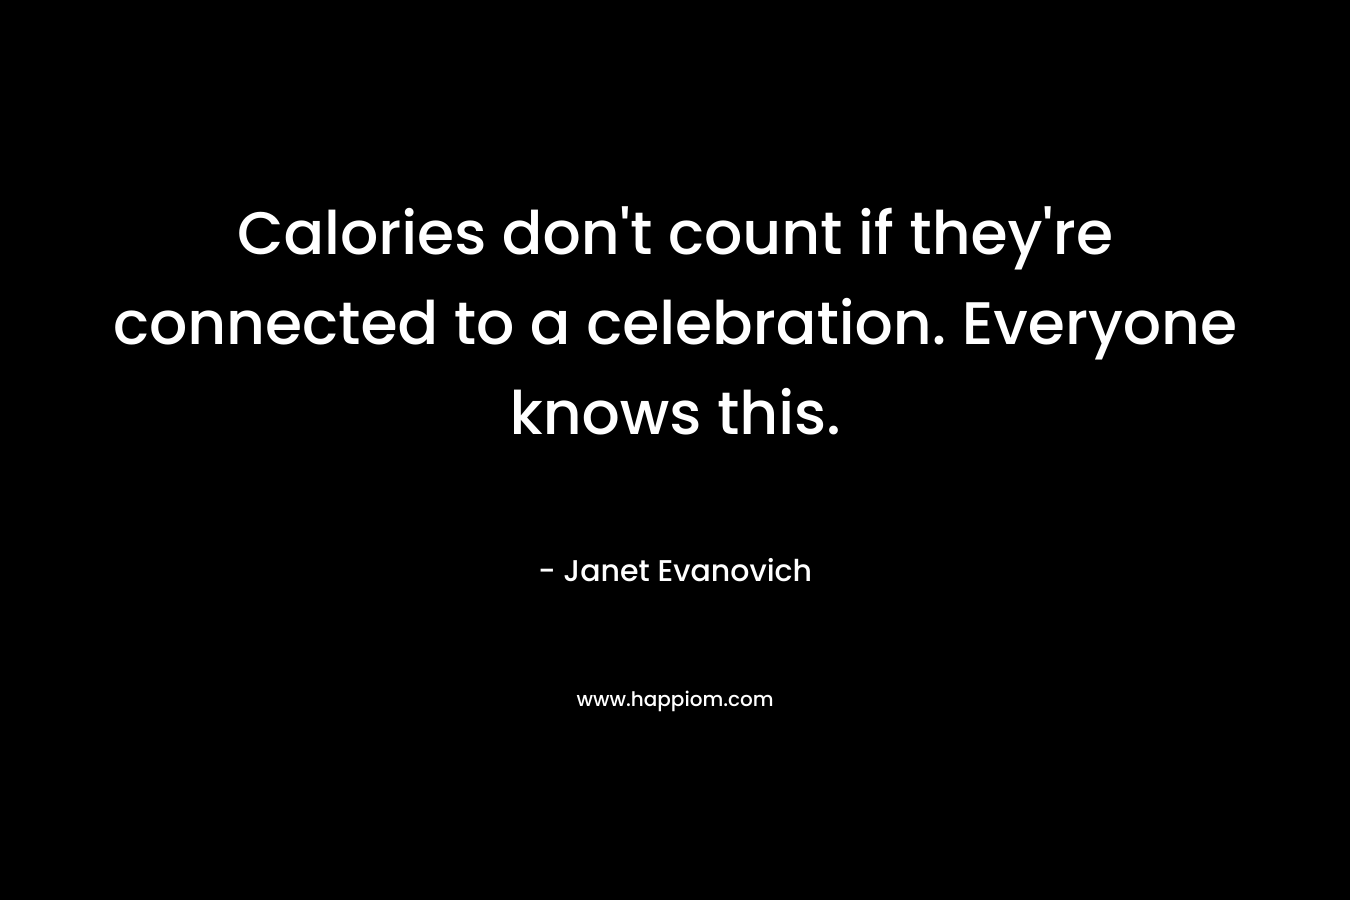 Calories don’t count if they’re connected to a celebration. Everyone knows this. – Janet Evanovich